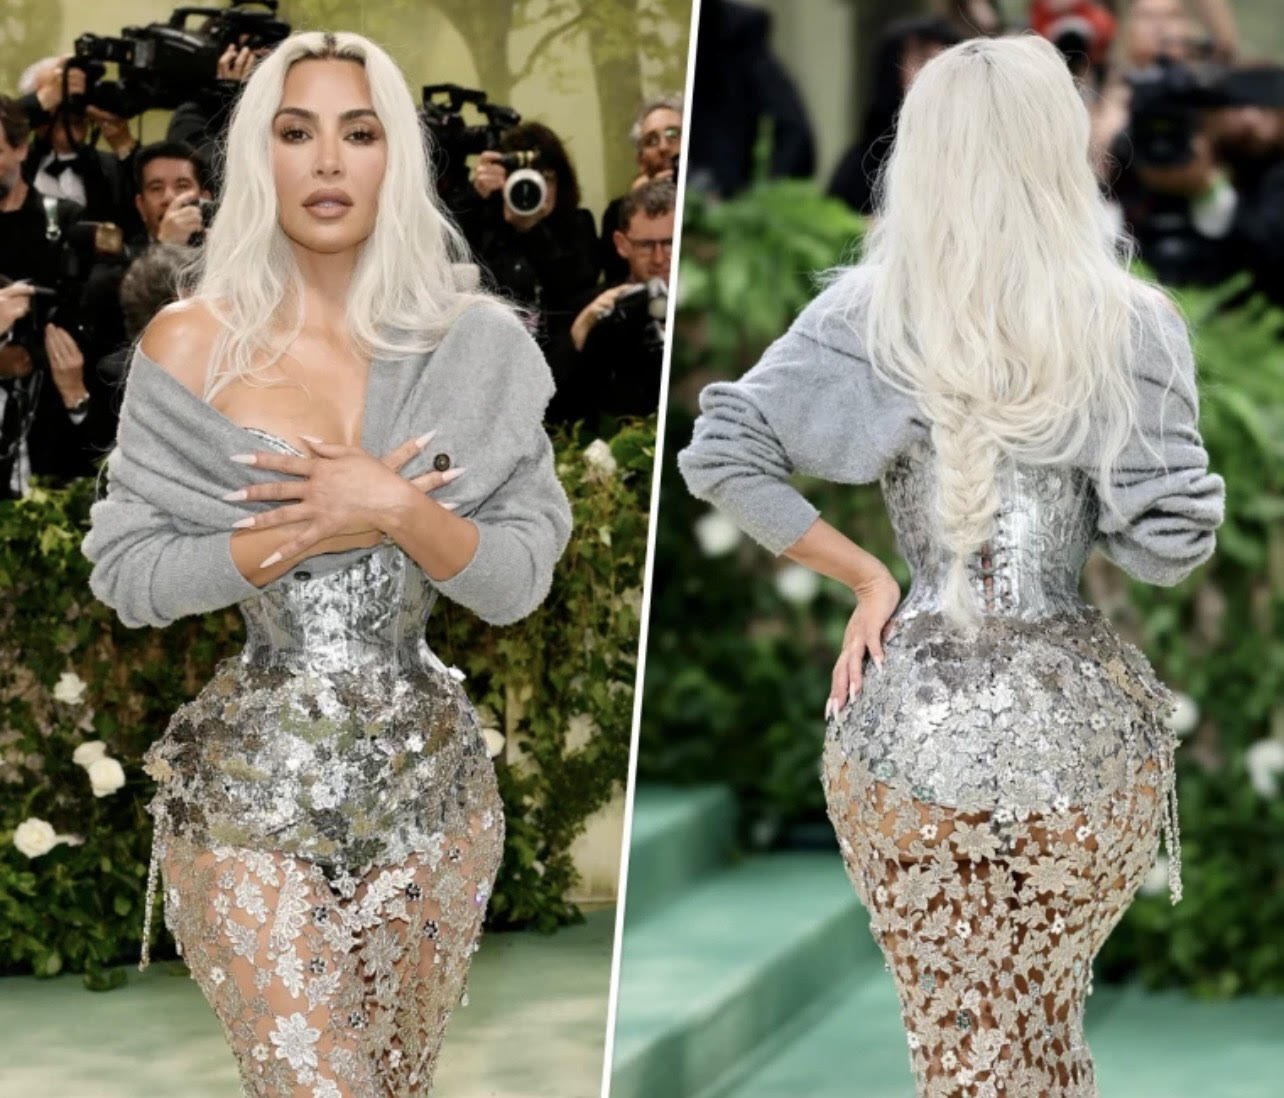 Ya'll, Kim Kardashian's pelvic floor is probably not ok after what she wore to the Met Gala 😳
Imagine your abdomen is like a balloon--If you squeeze everything too tight in the middle, that shunts pressure up and down as the result of the squeeze.
O